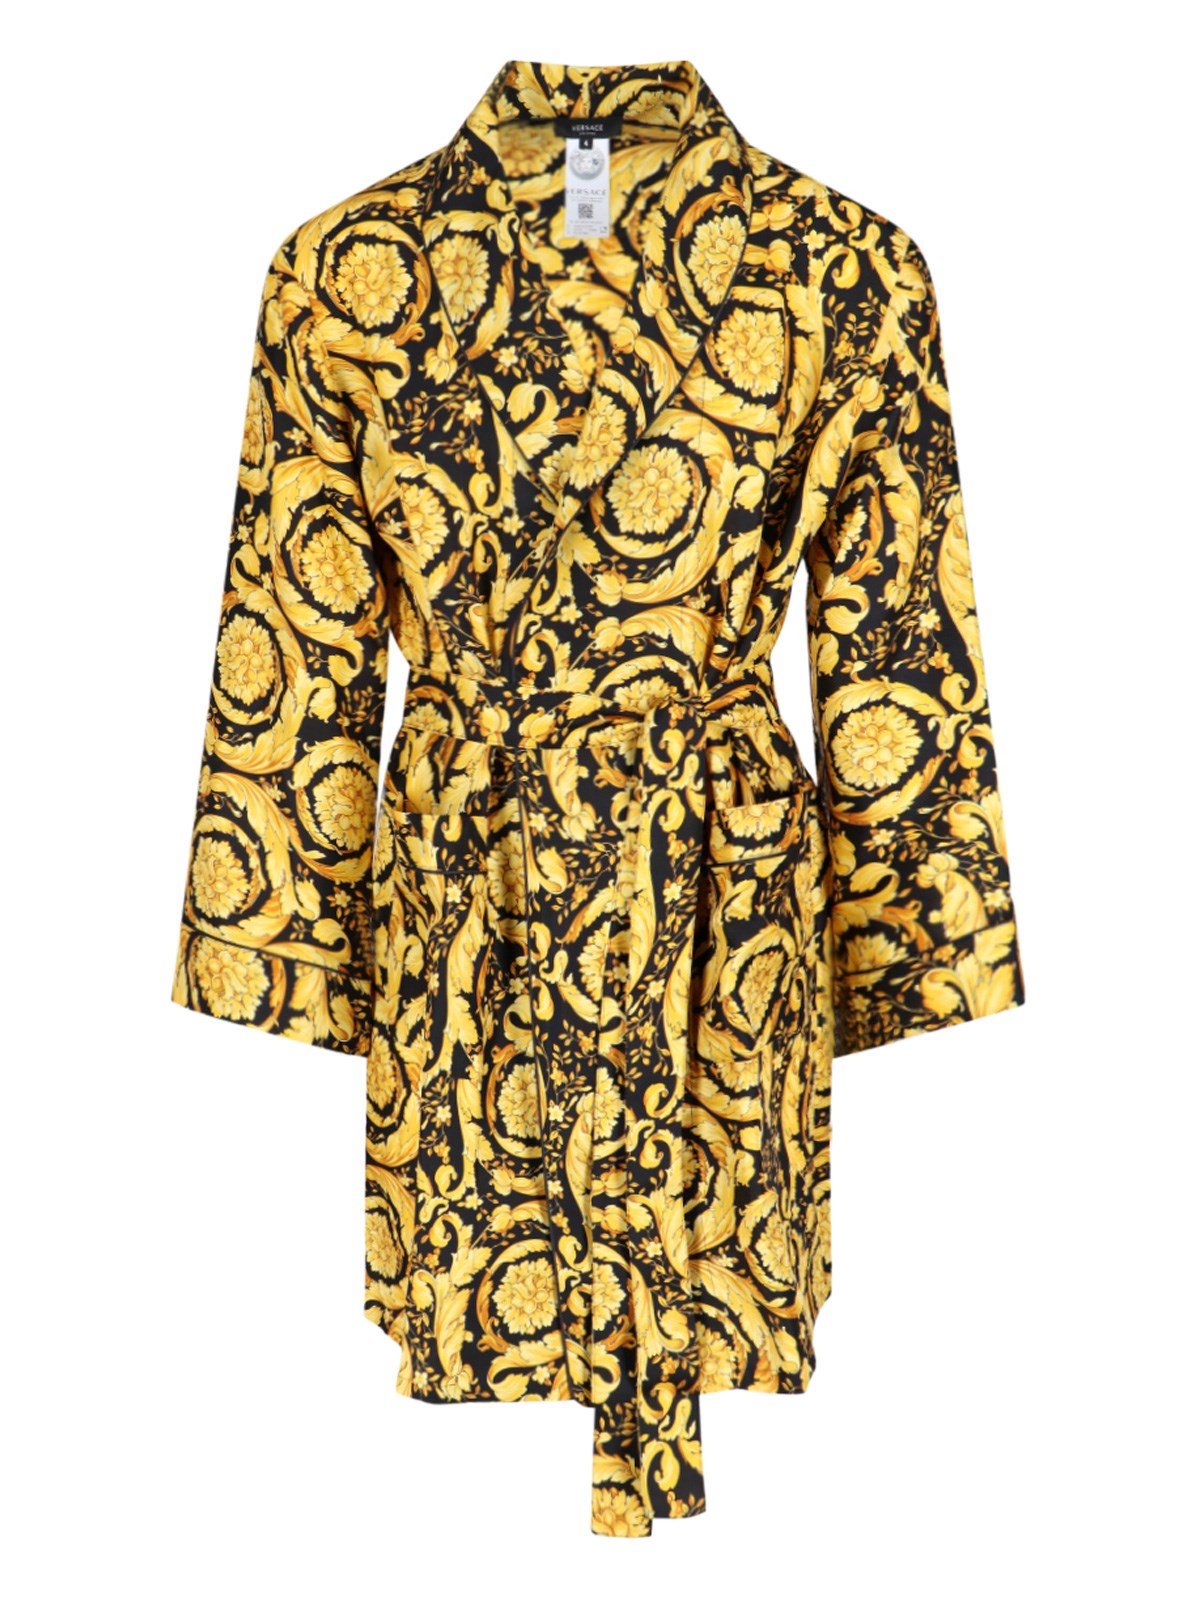 VERSACE "BAROCCO" DRESSING GOWN